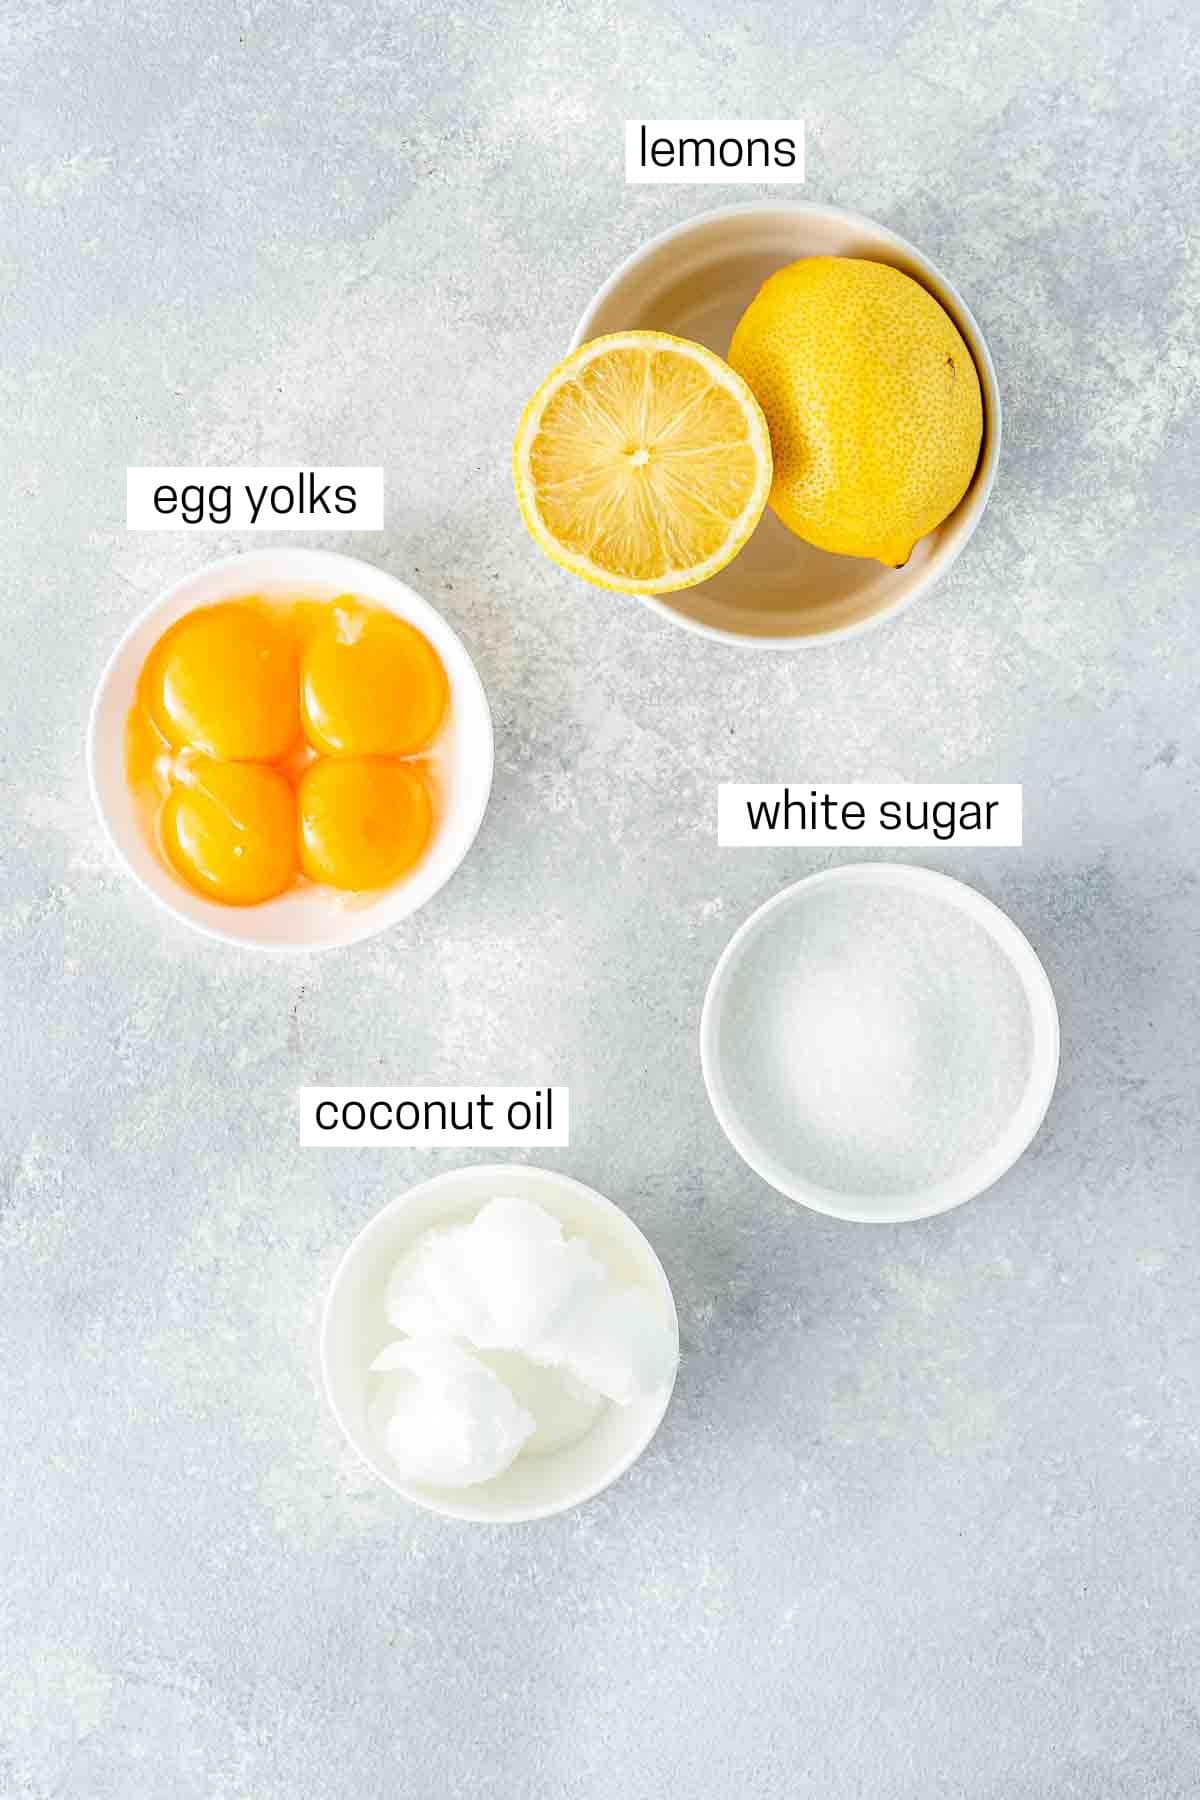 All ingredients needed for dairy free lemon curd in small bowls.